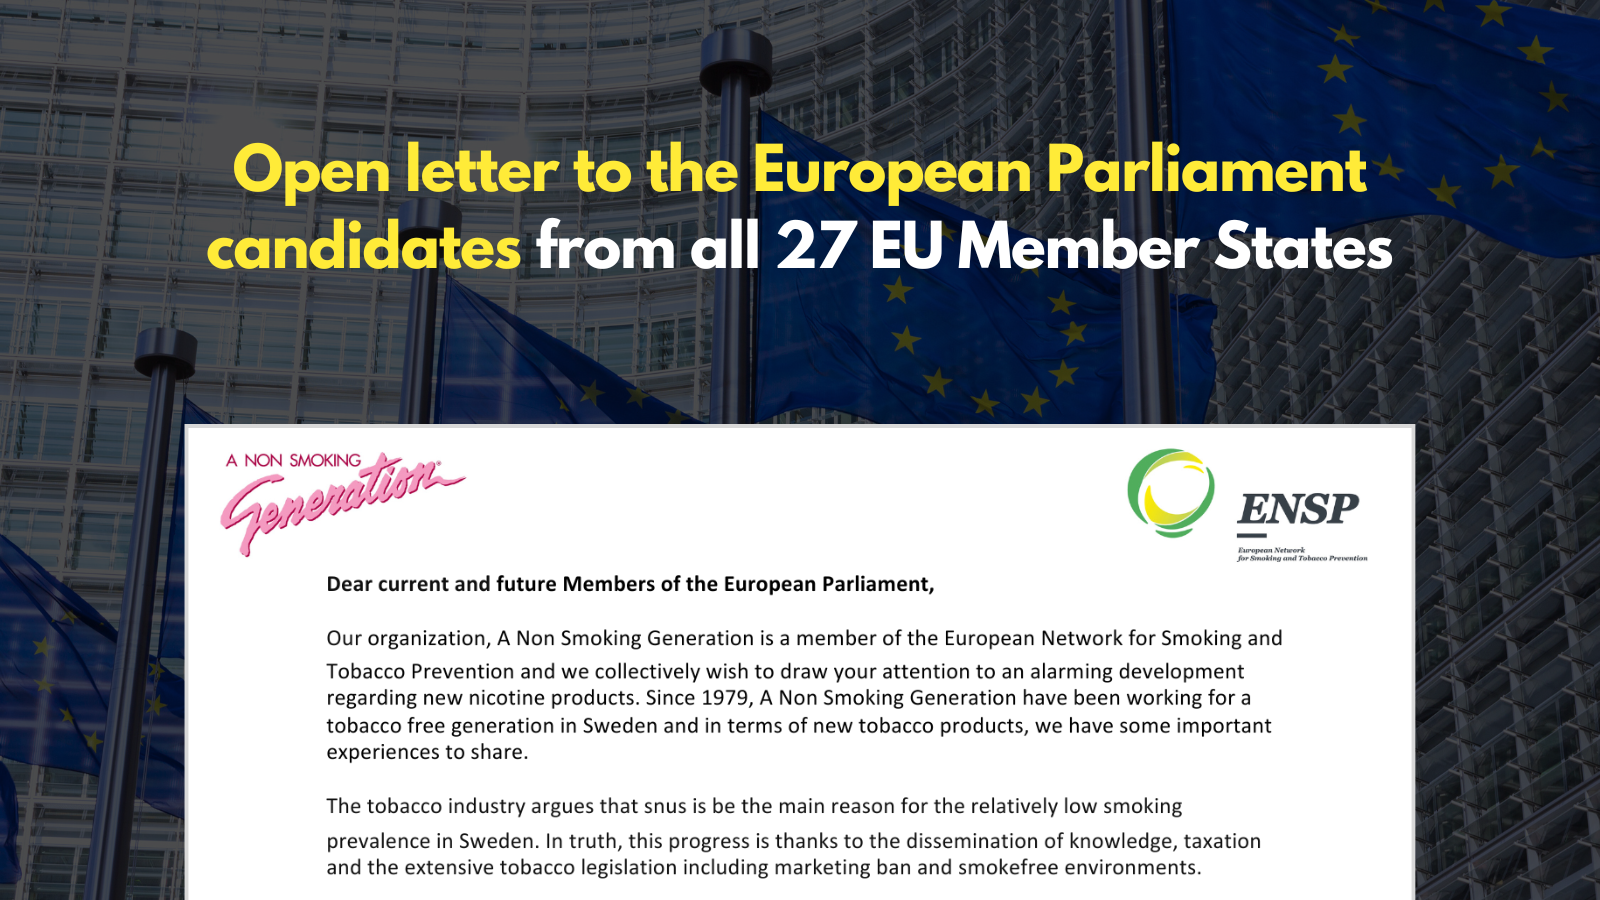 Open letter to the European Parliament candidates from all 27 EU Member States